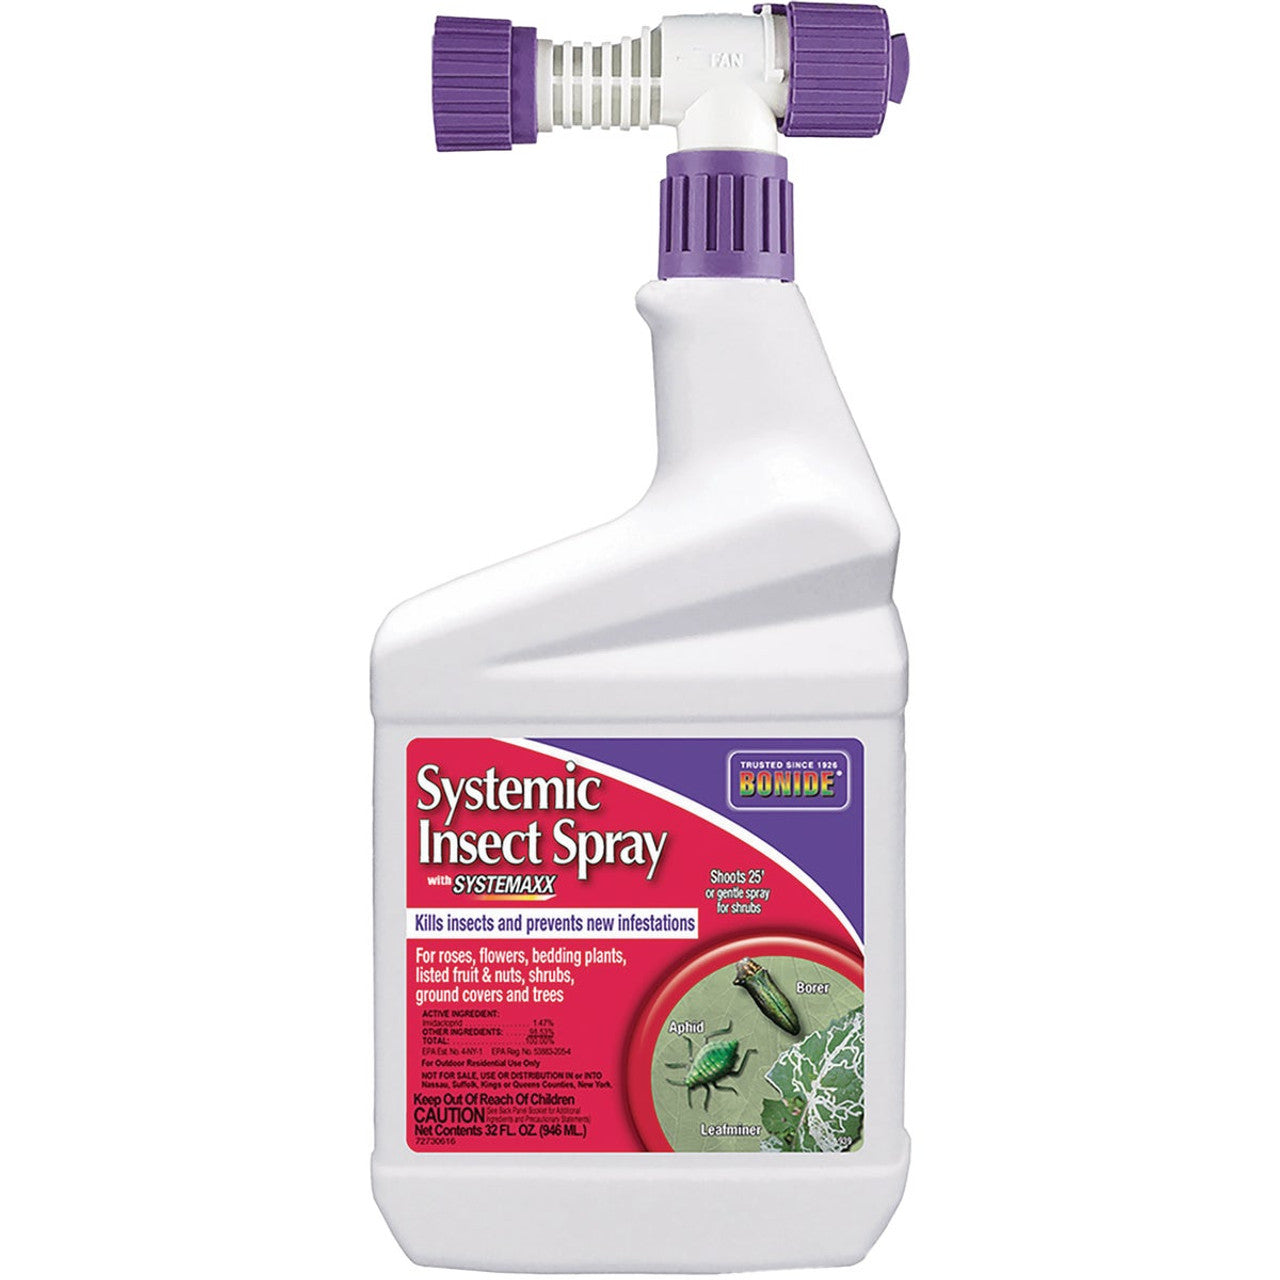 Bonide Systemic Insect Control Spray